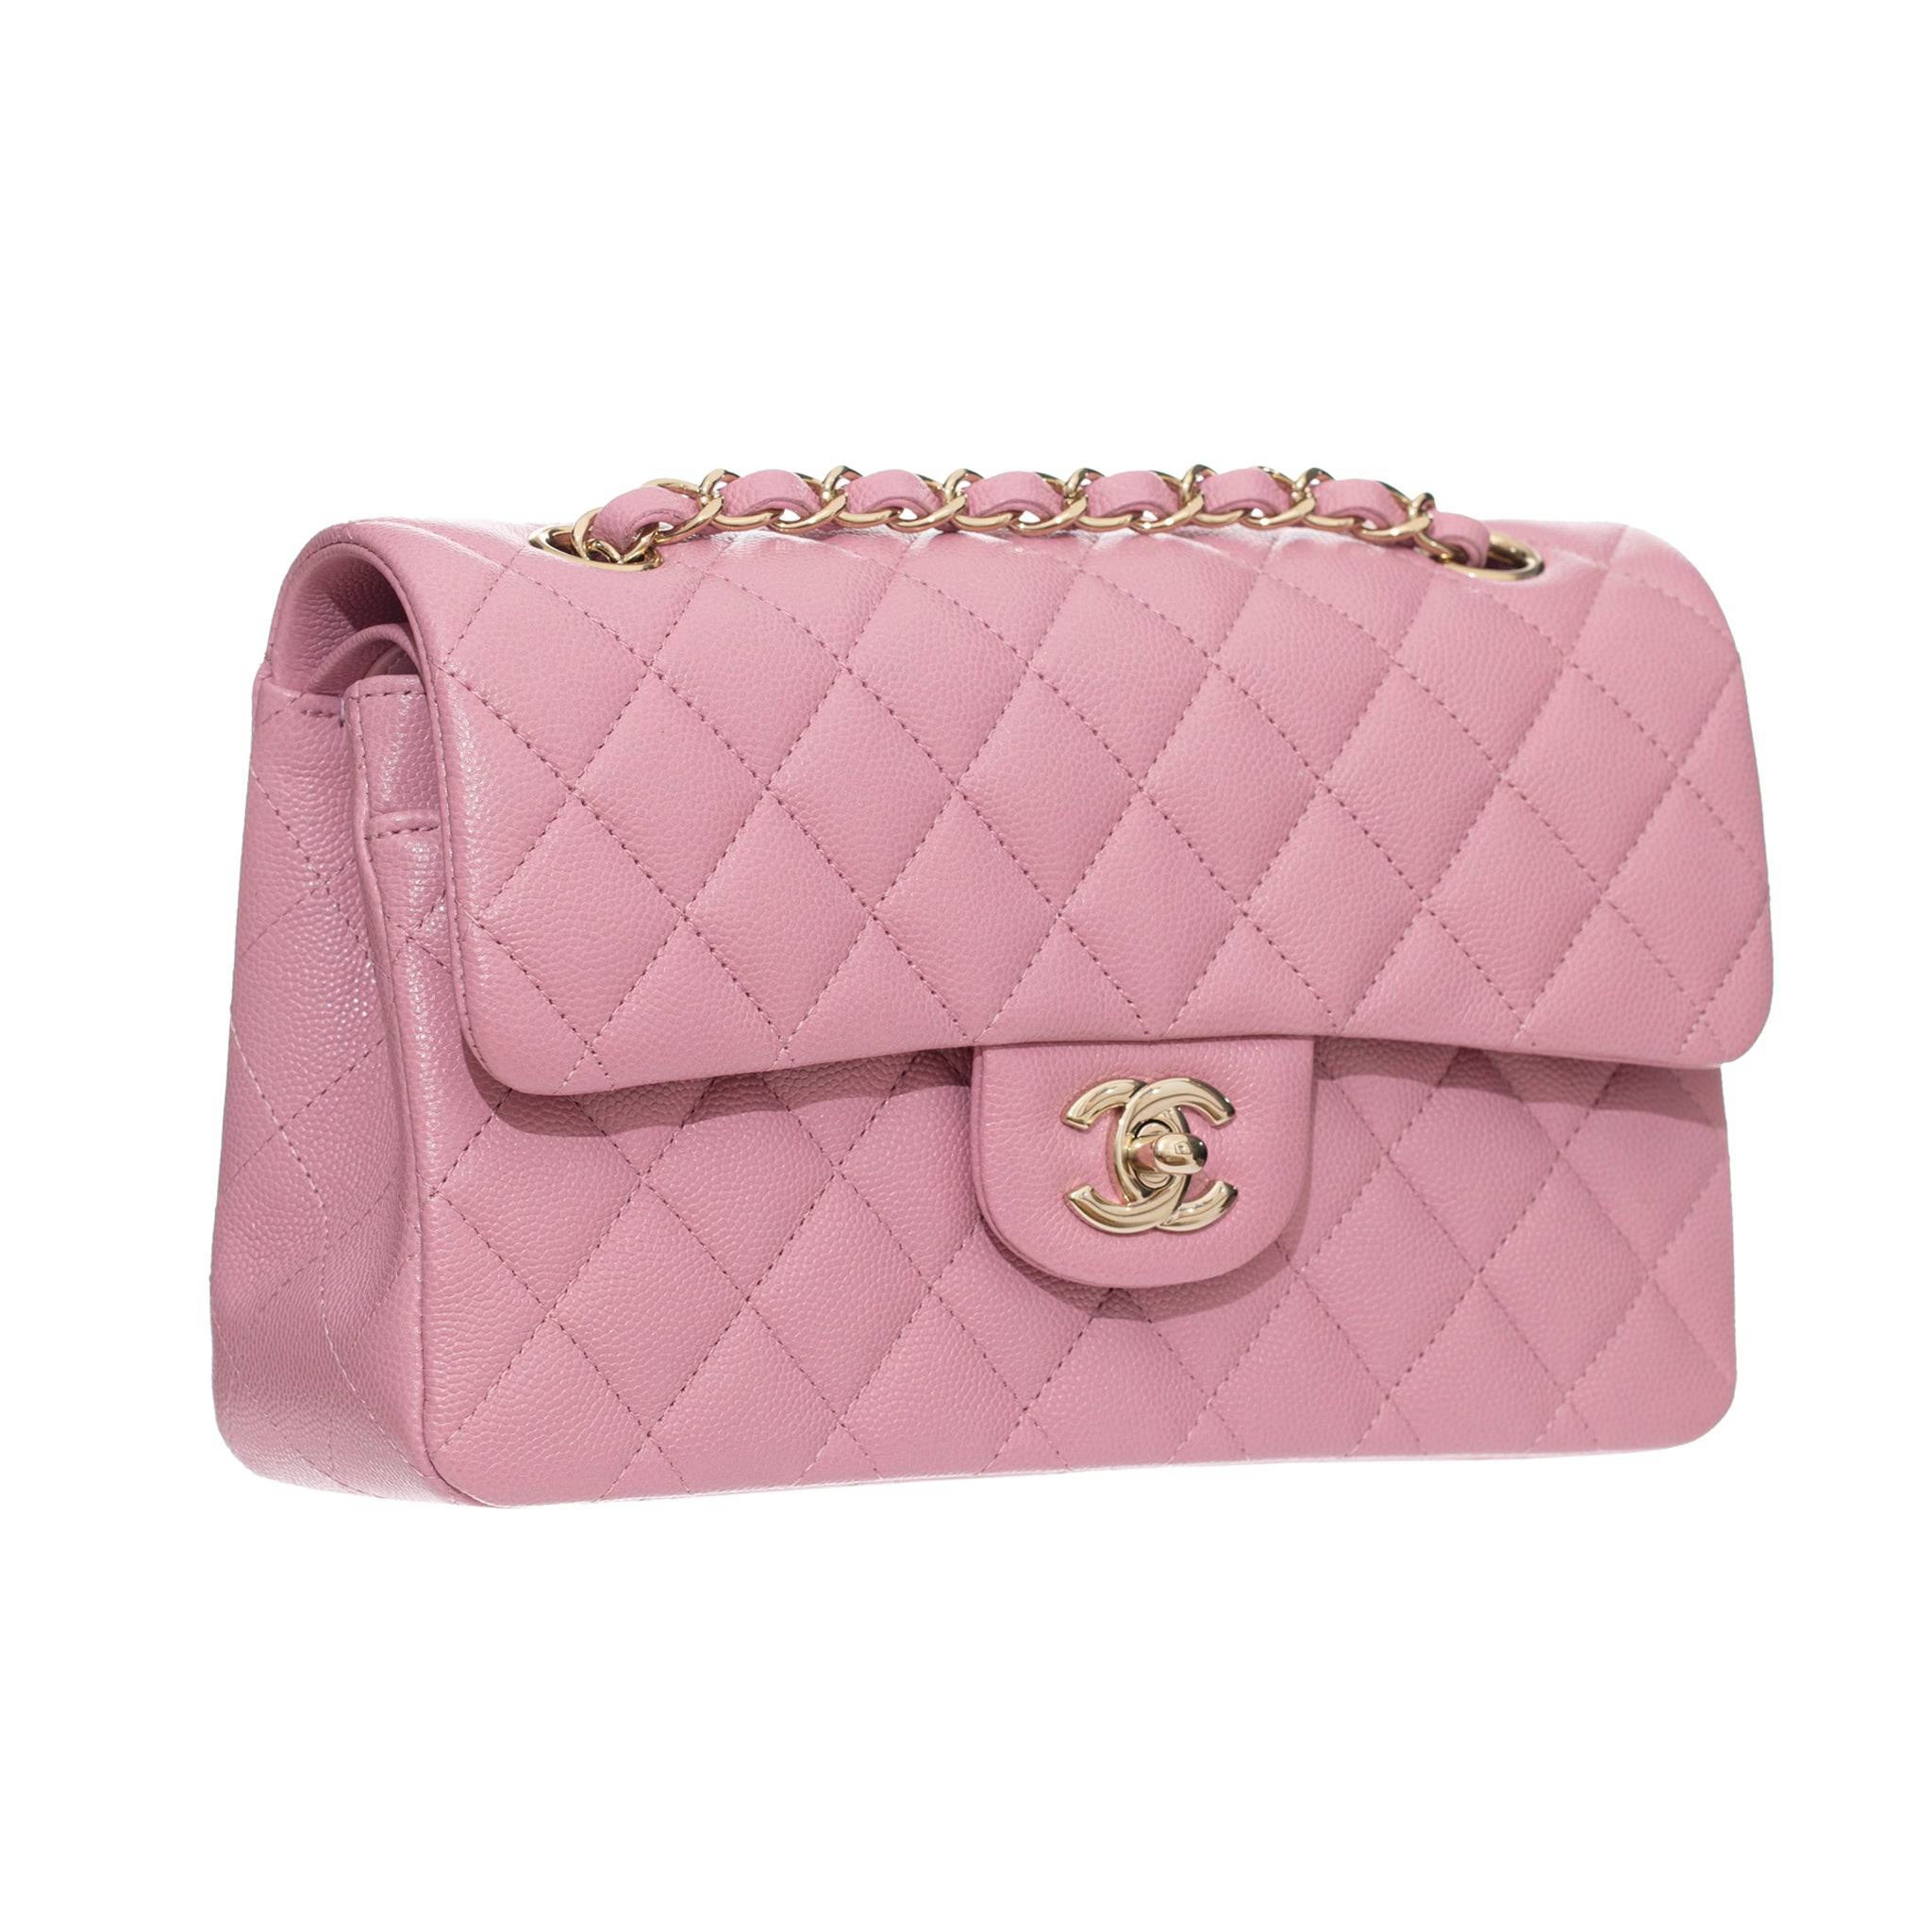 CHANEL DOUBLE CLASSIC FLAP PINK CAVIAR LEATHER CHAMPAGNE GOLD HARDWARE - On Repeat